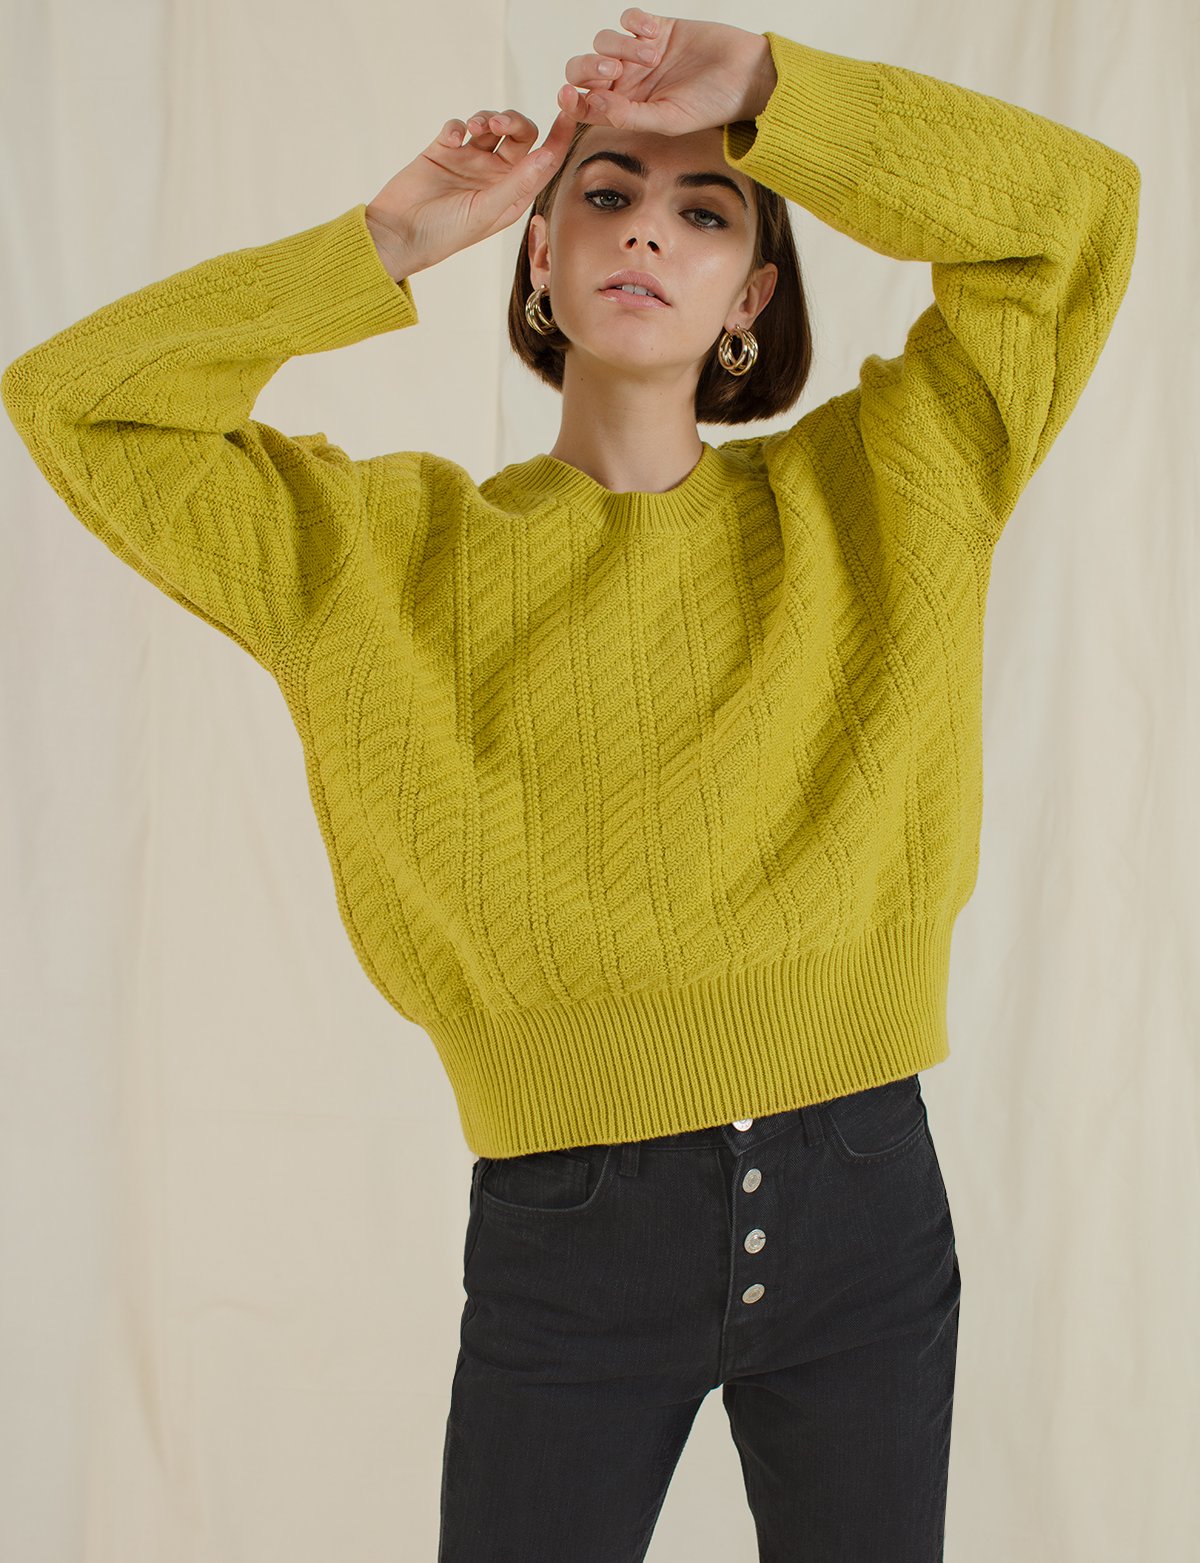 Chartreuse Cable Knit Sweater, $89